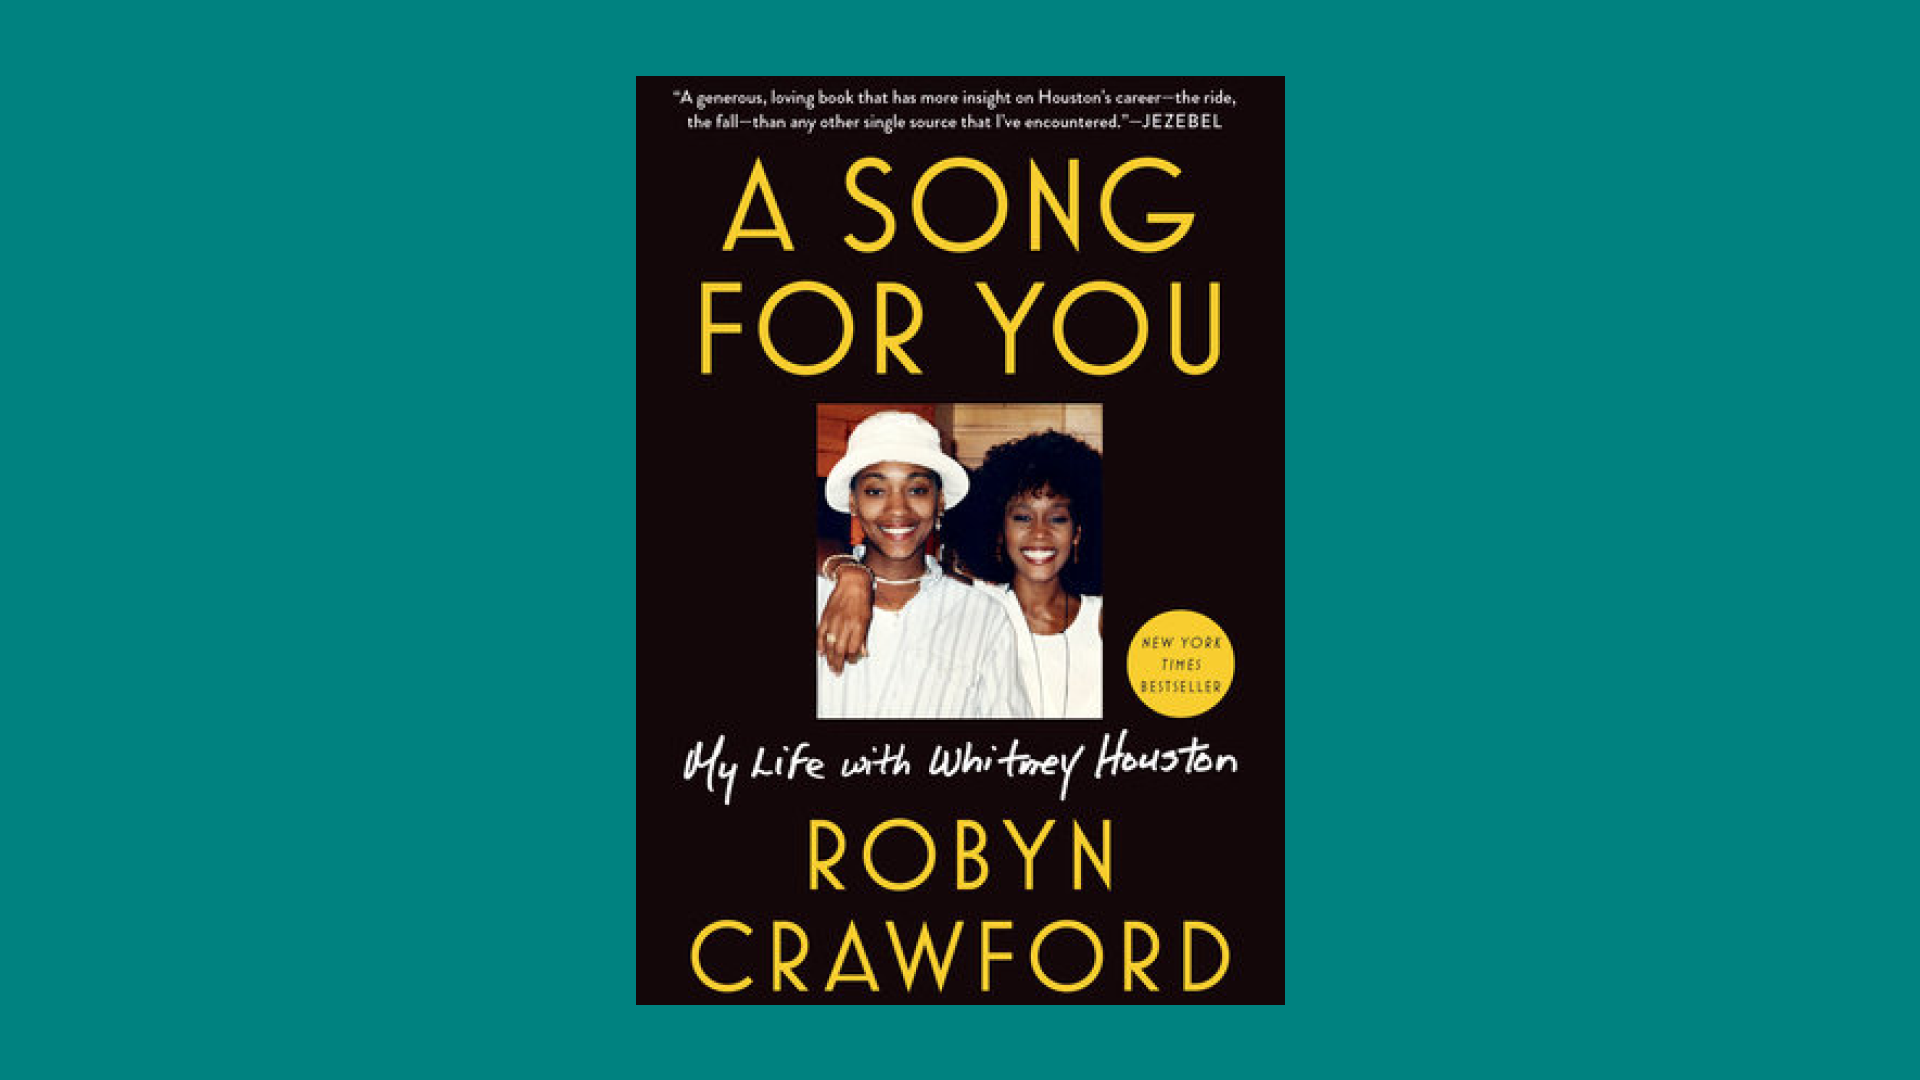 “A Song for You” by Robyn Crawford 